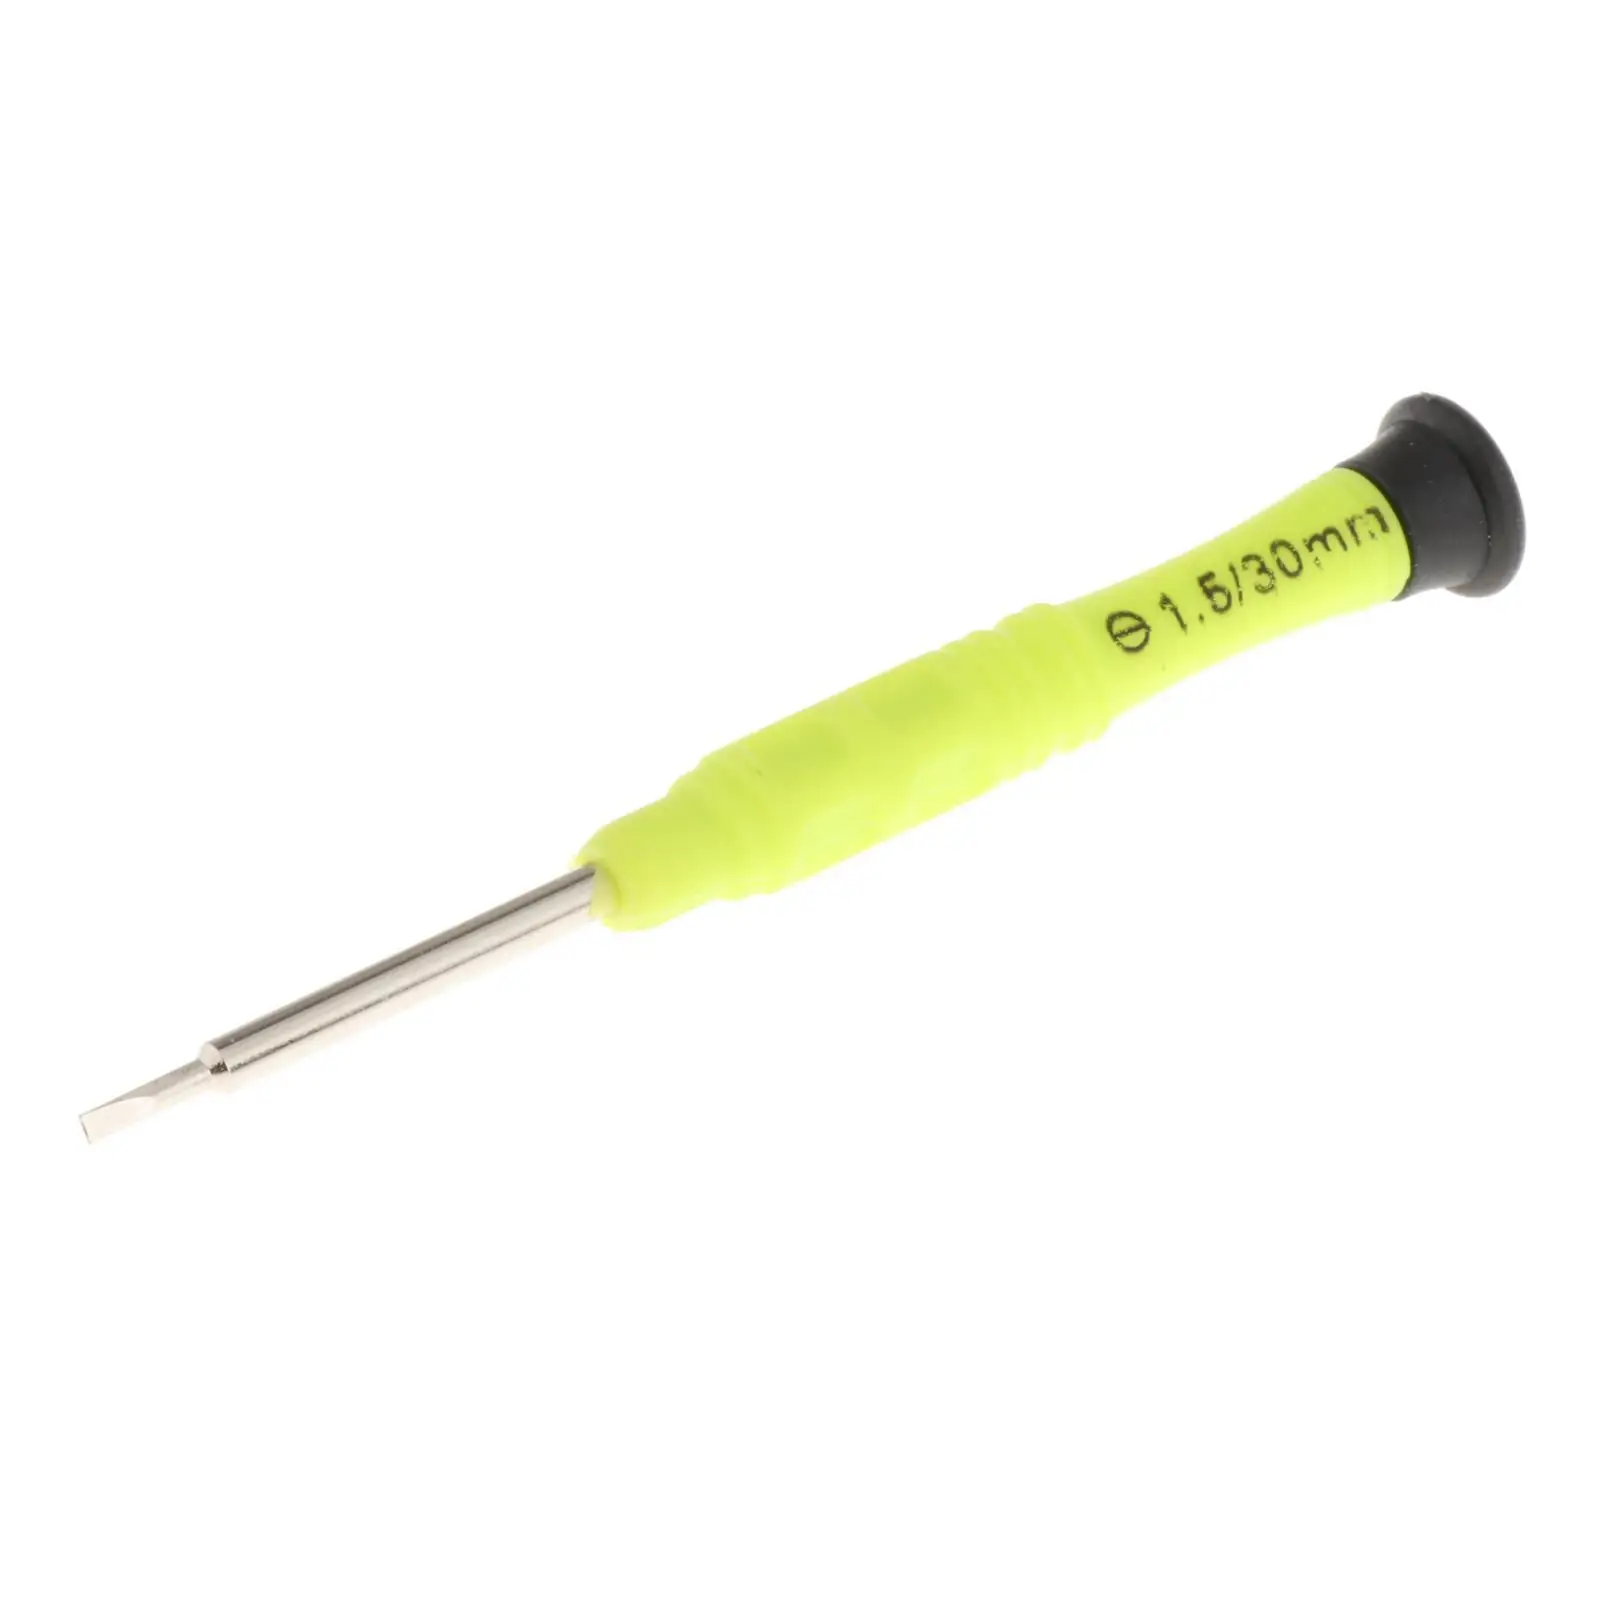 Fencing Screwdriver Professional Hand Tools for Competitions Foil Accessory